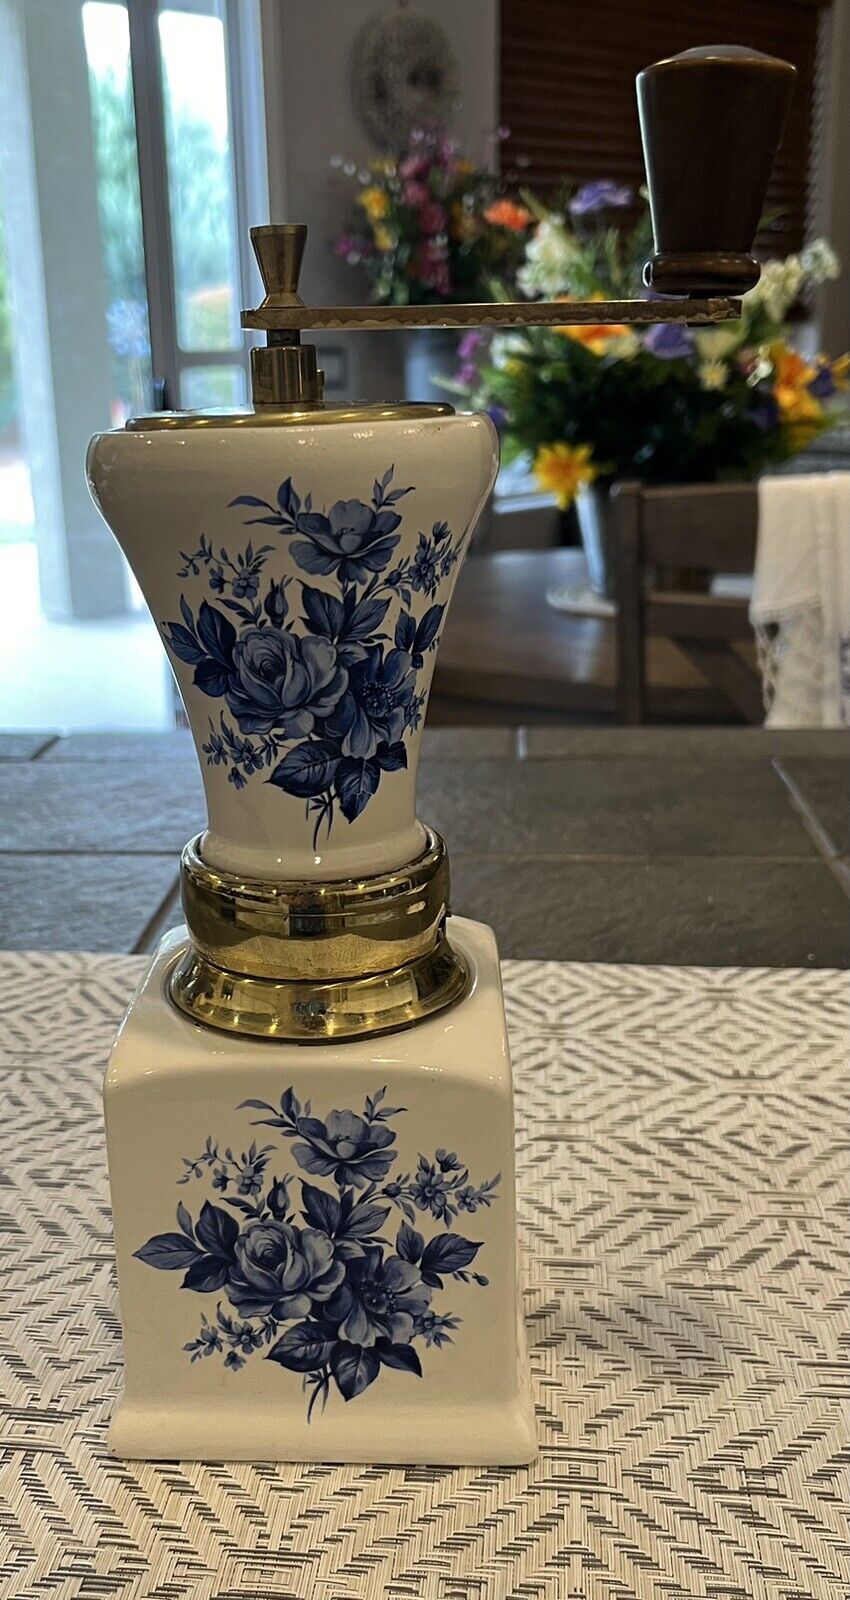 Vintage White & Blue Rose Porcelain Coffee Grinder Brass Trim From Italy